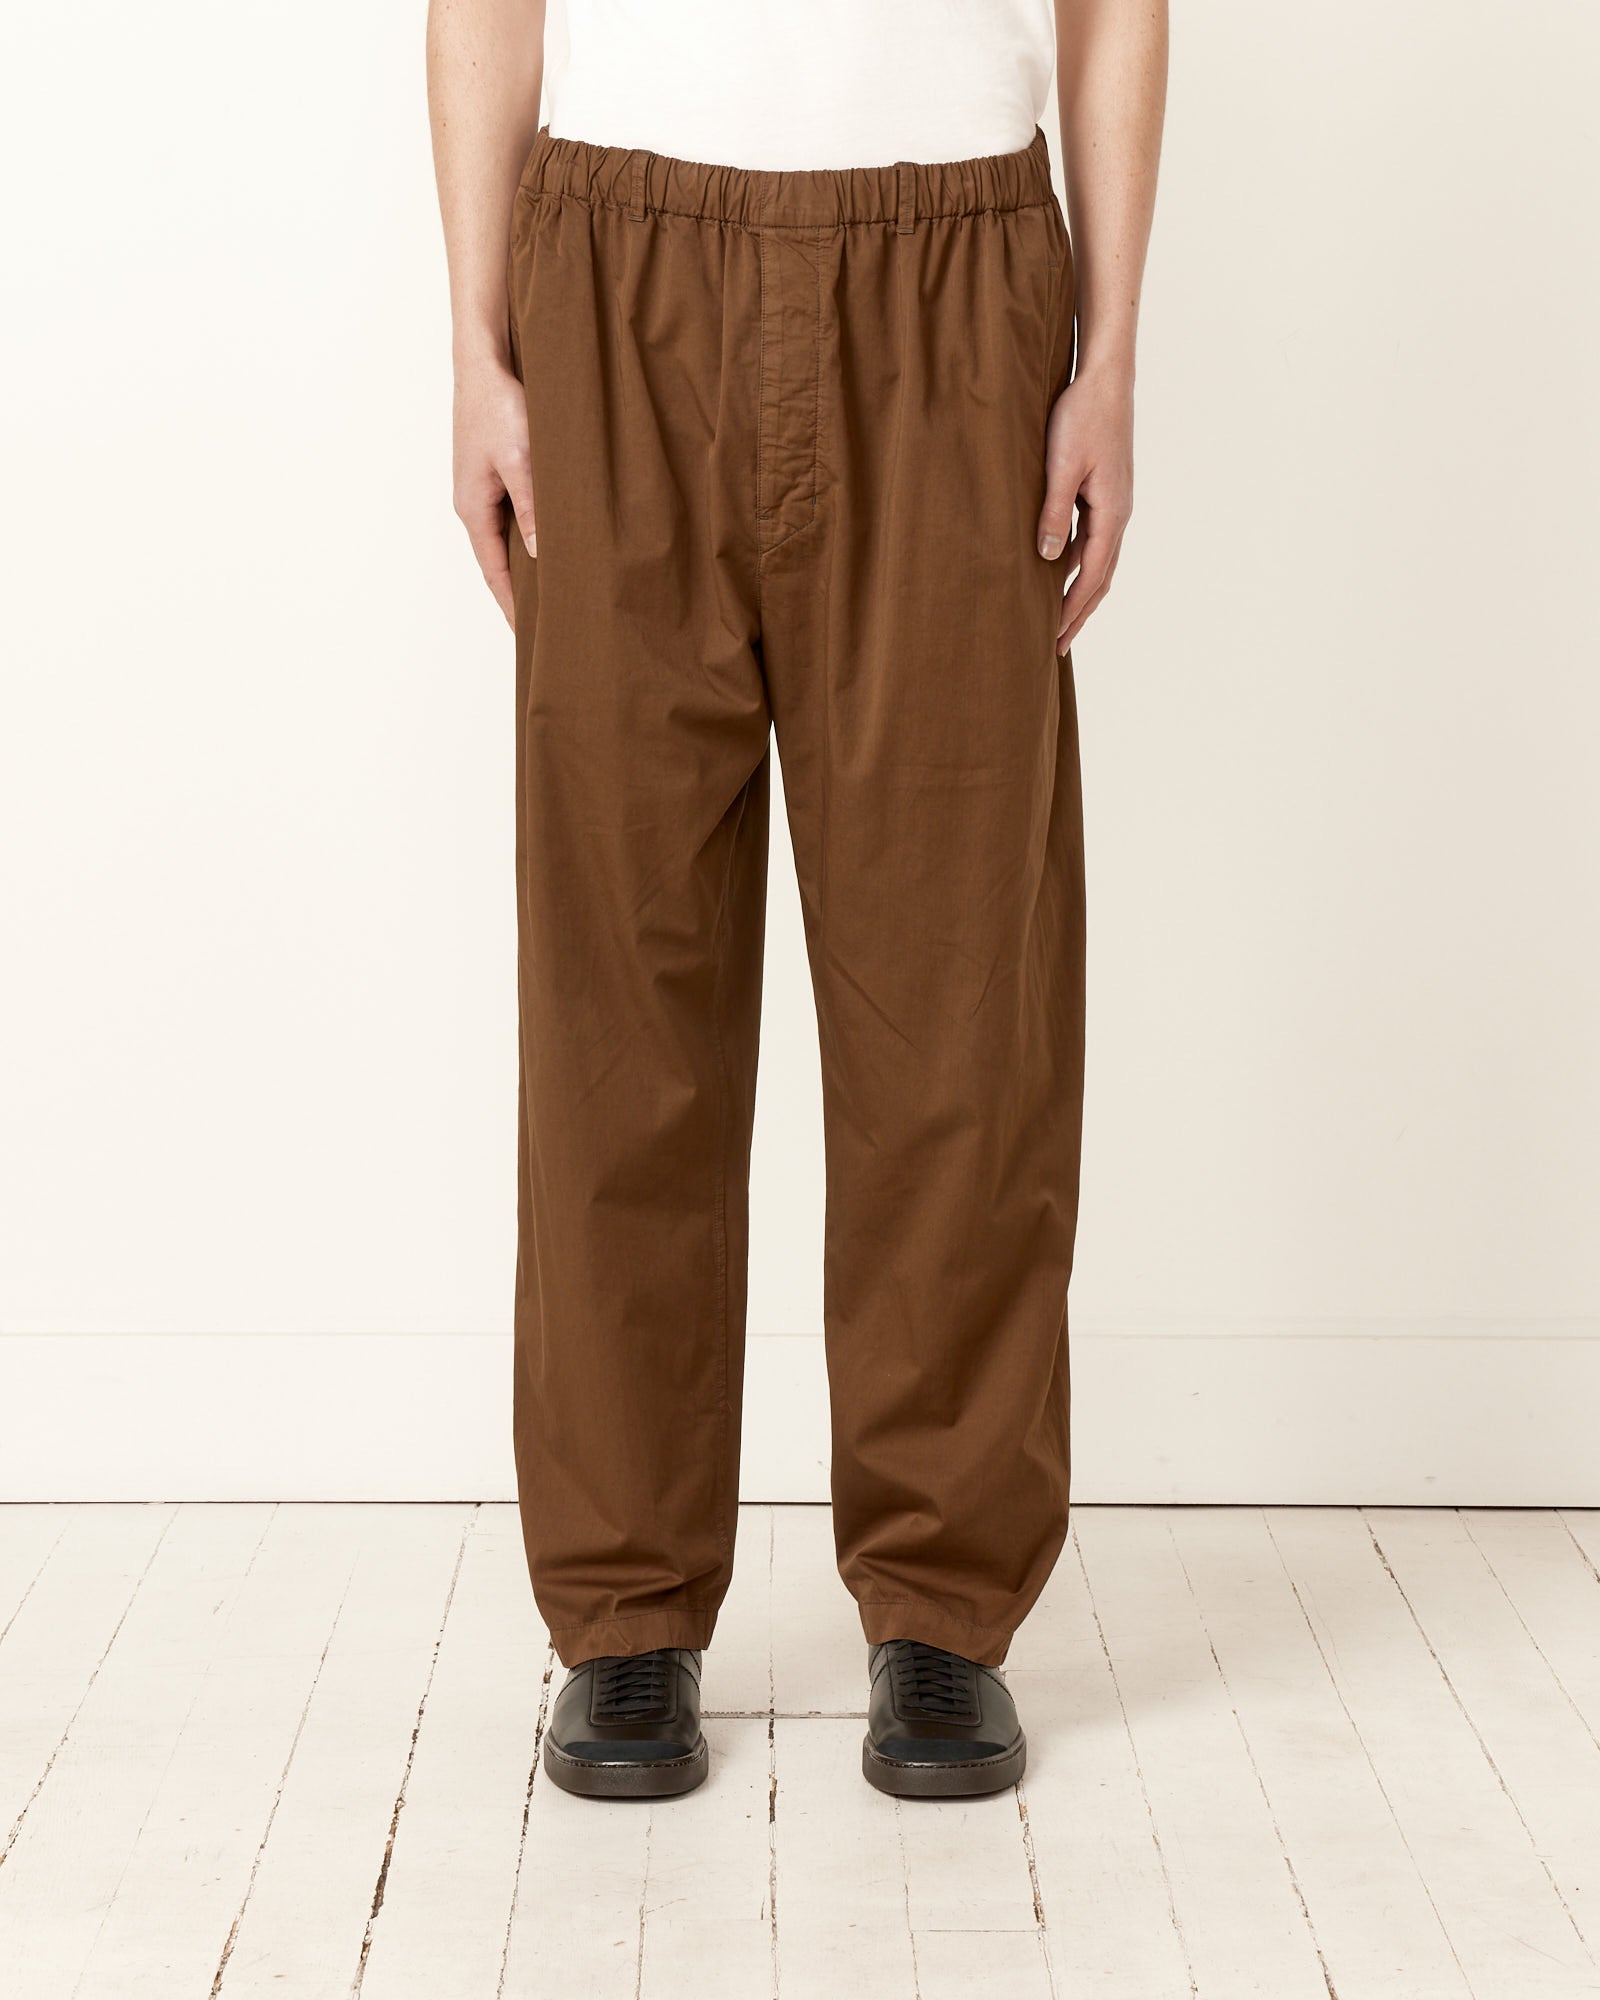 Relaxed Pant in Dark Tobacco